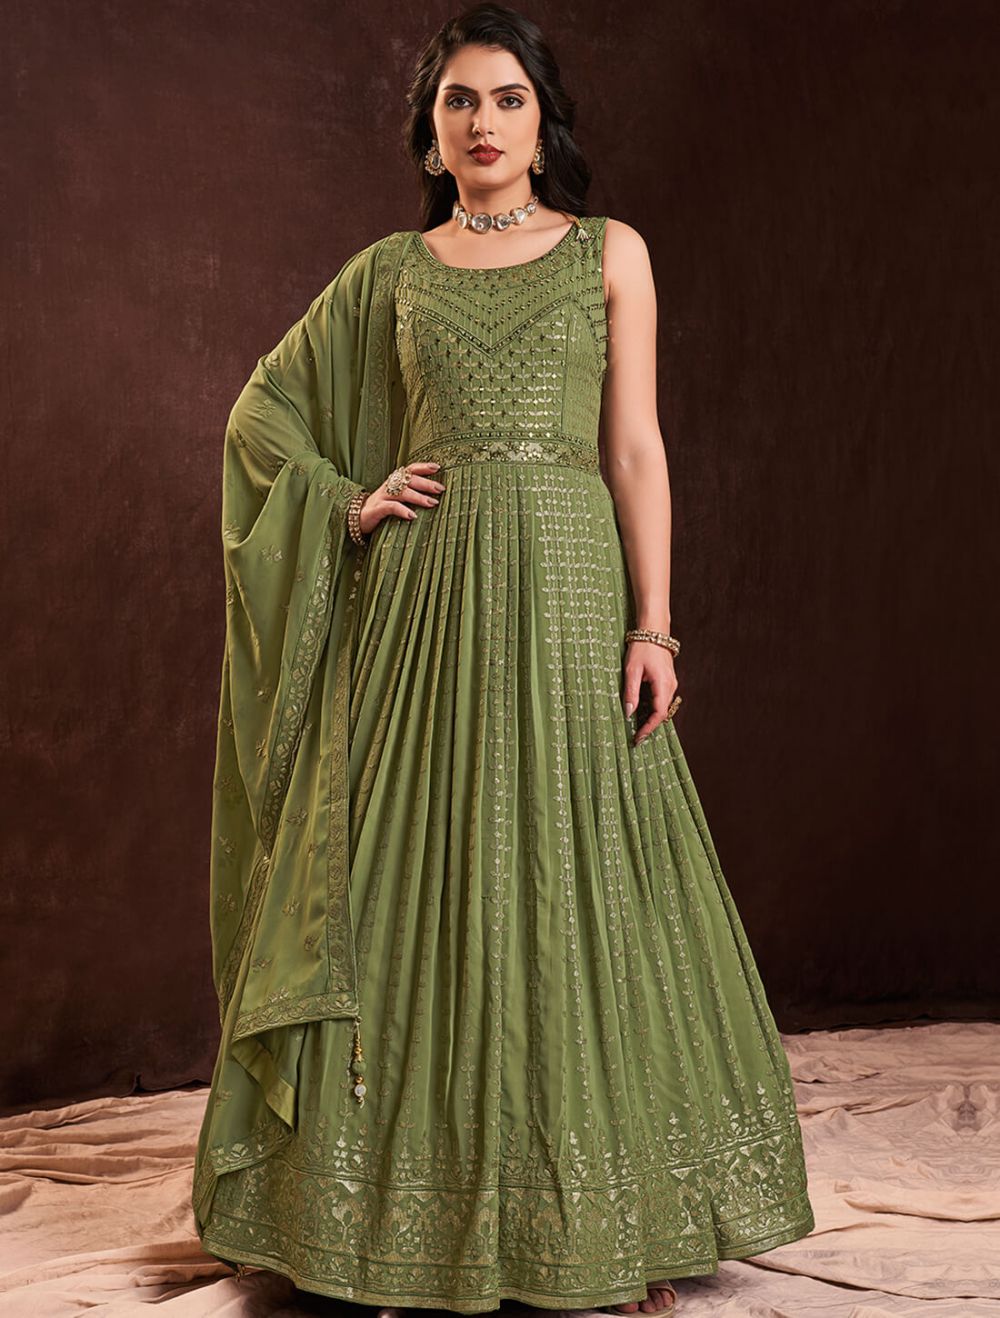 9 Modern Designs of Green Color Frocks for Stunning Look